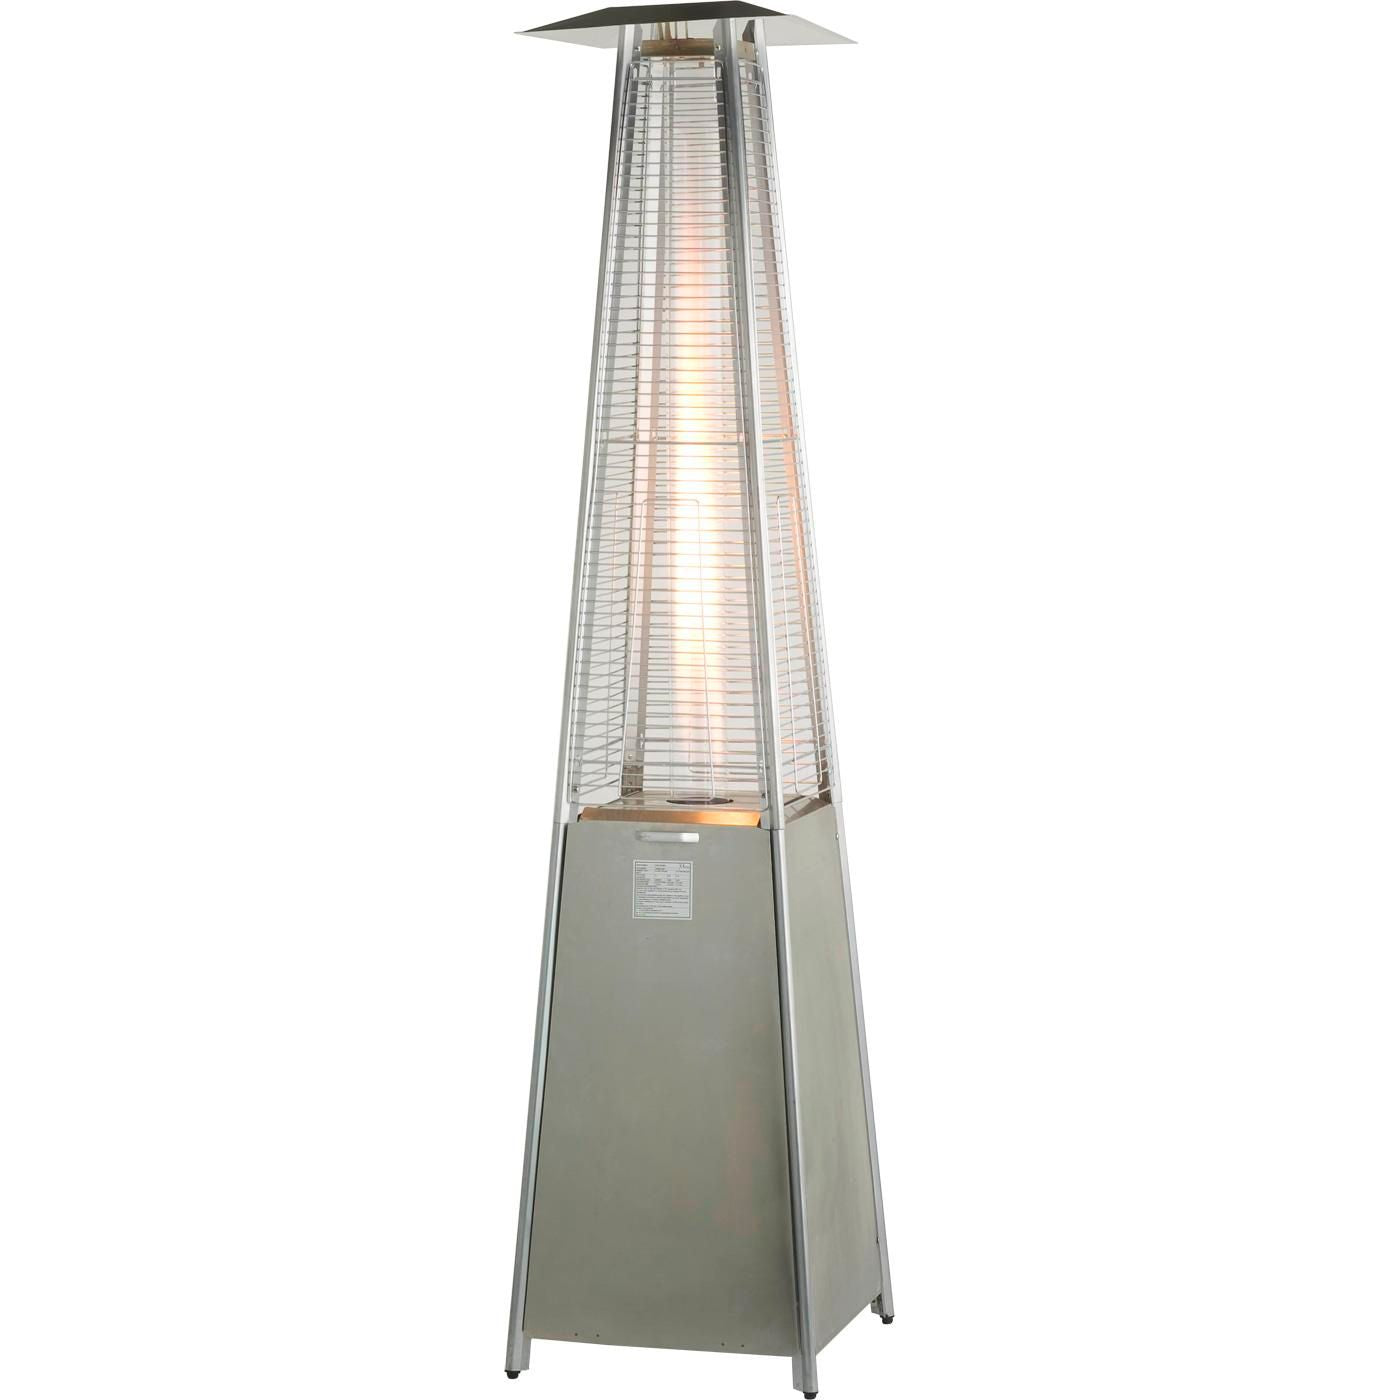 RADtec 89" Tower Flame Propane Patio Heater - Stainless Steel--Outdoor Direct